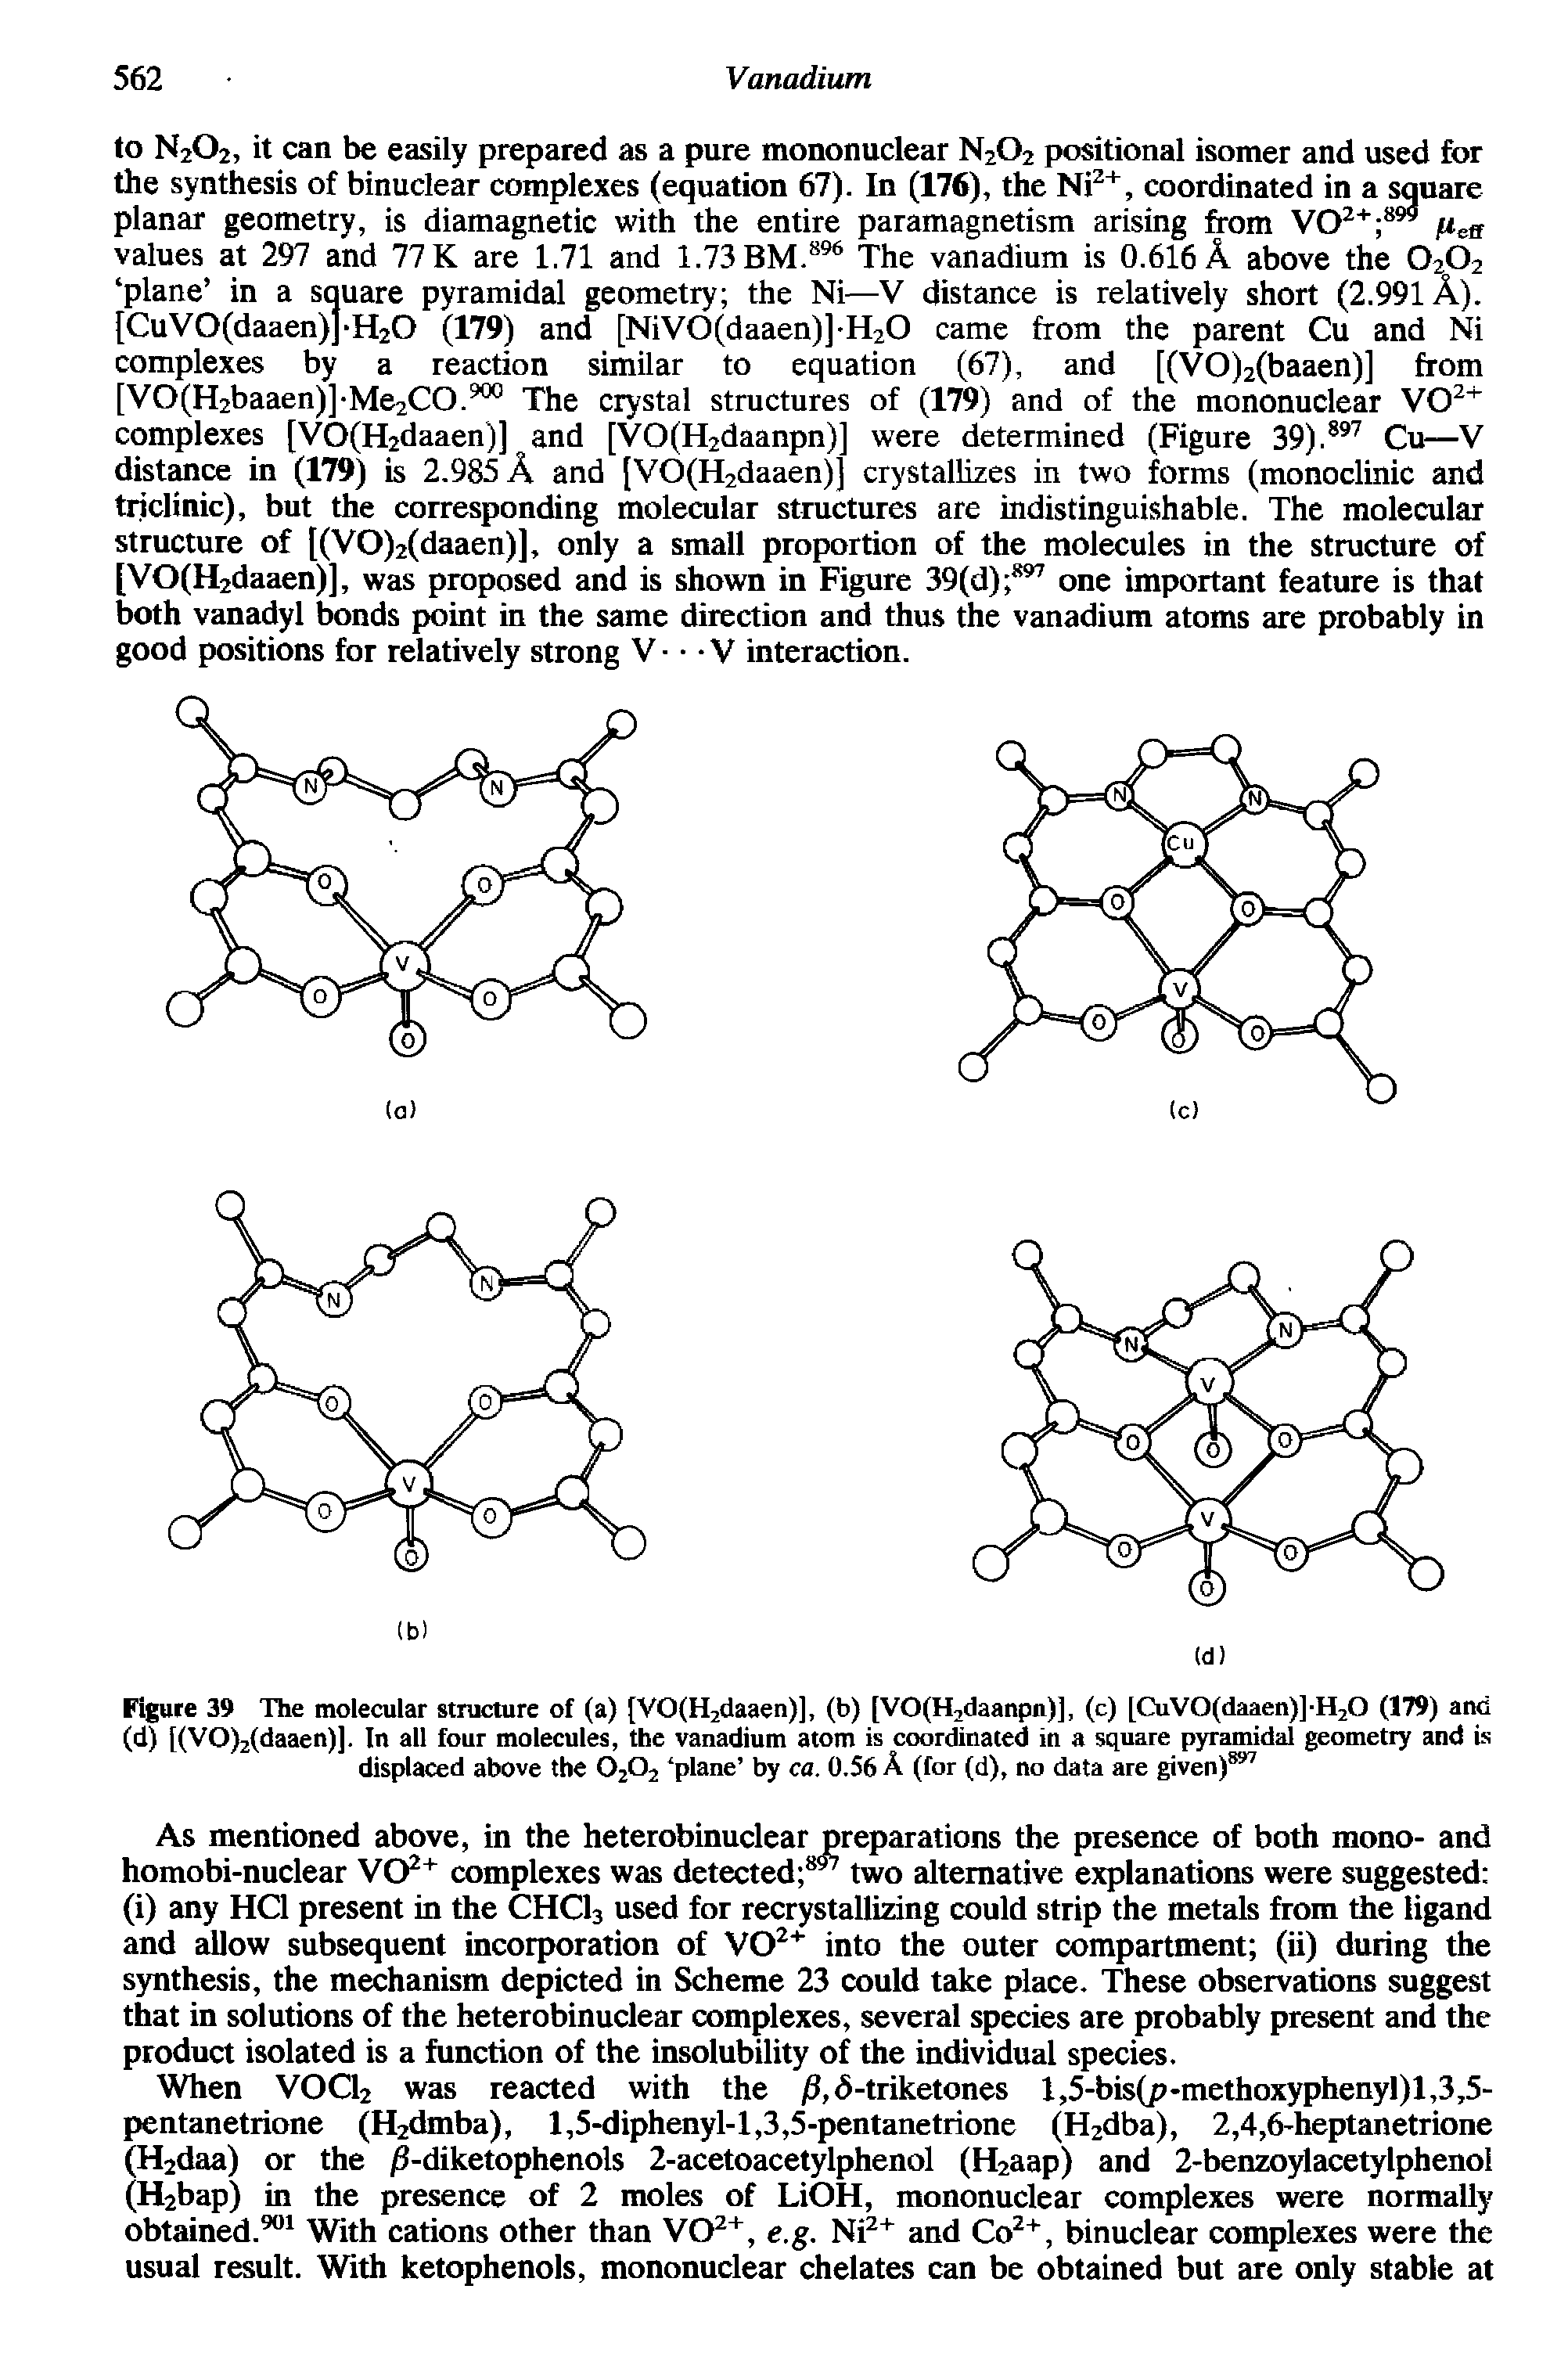 Figure 39 The molecular structure of (a) [VO(H2daaen)], (b) [VO(H2daanpn)], (c) [CuVO(daaen)]-H20 (179) and (d) [(VO)2(daaen)]. In all four molecules, the vanadium atom is coordinated in a square pyramidal geometry and is displaced above the 0202 plane by ca. 0.56 A (for (d), no data are given)897...